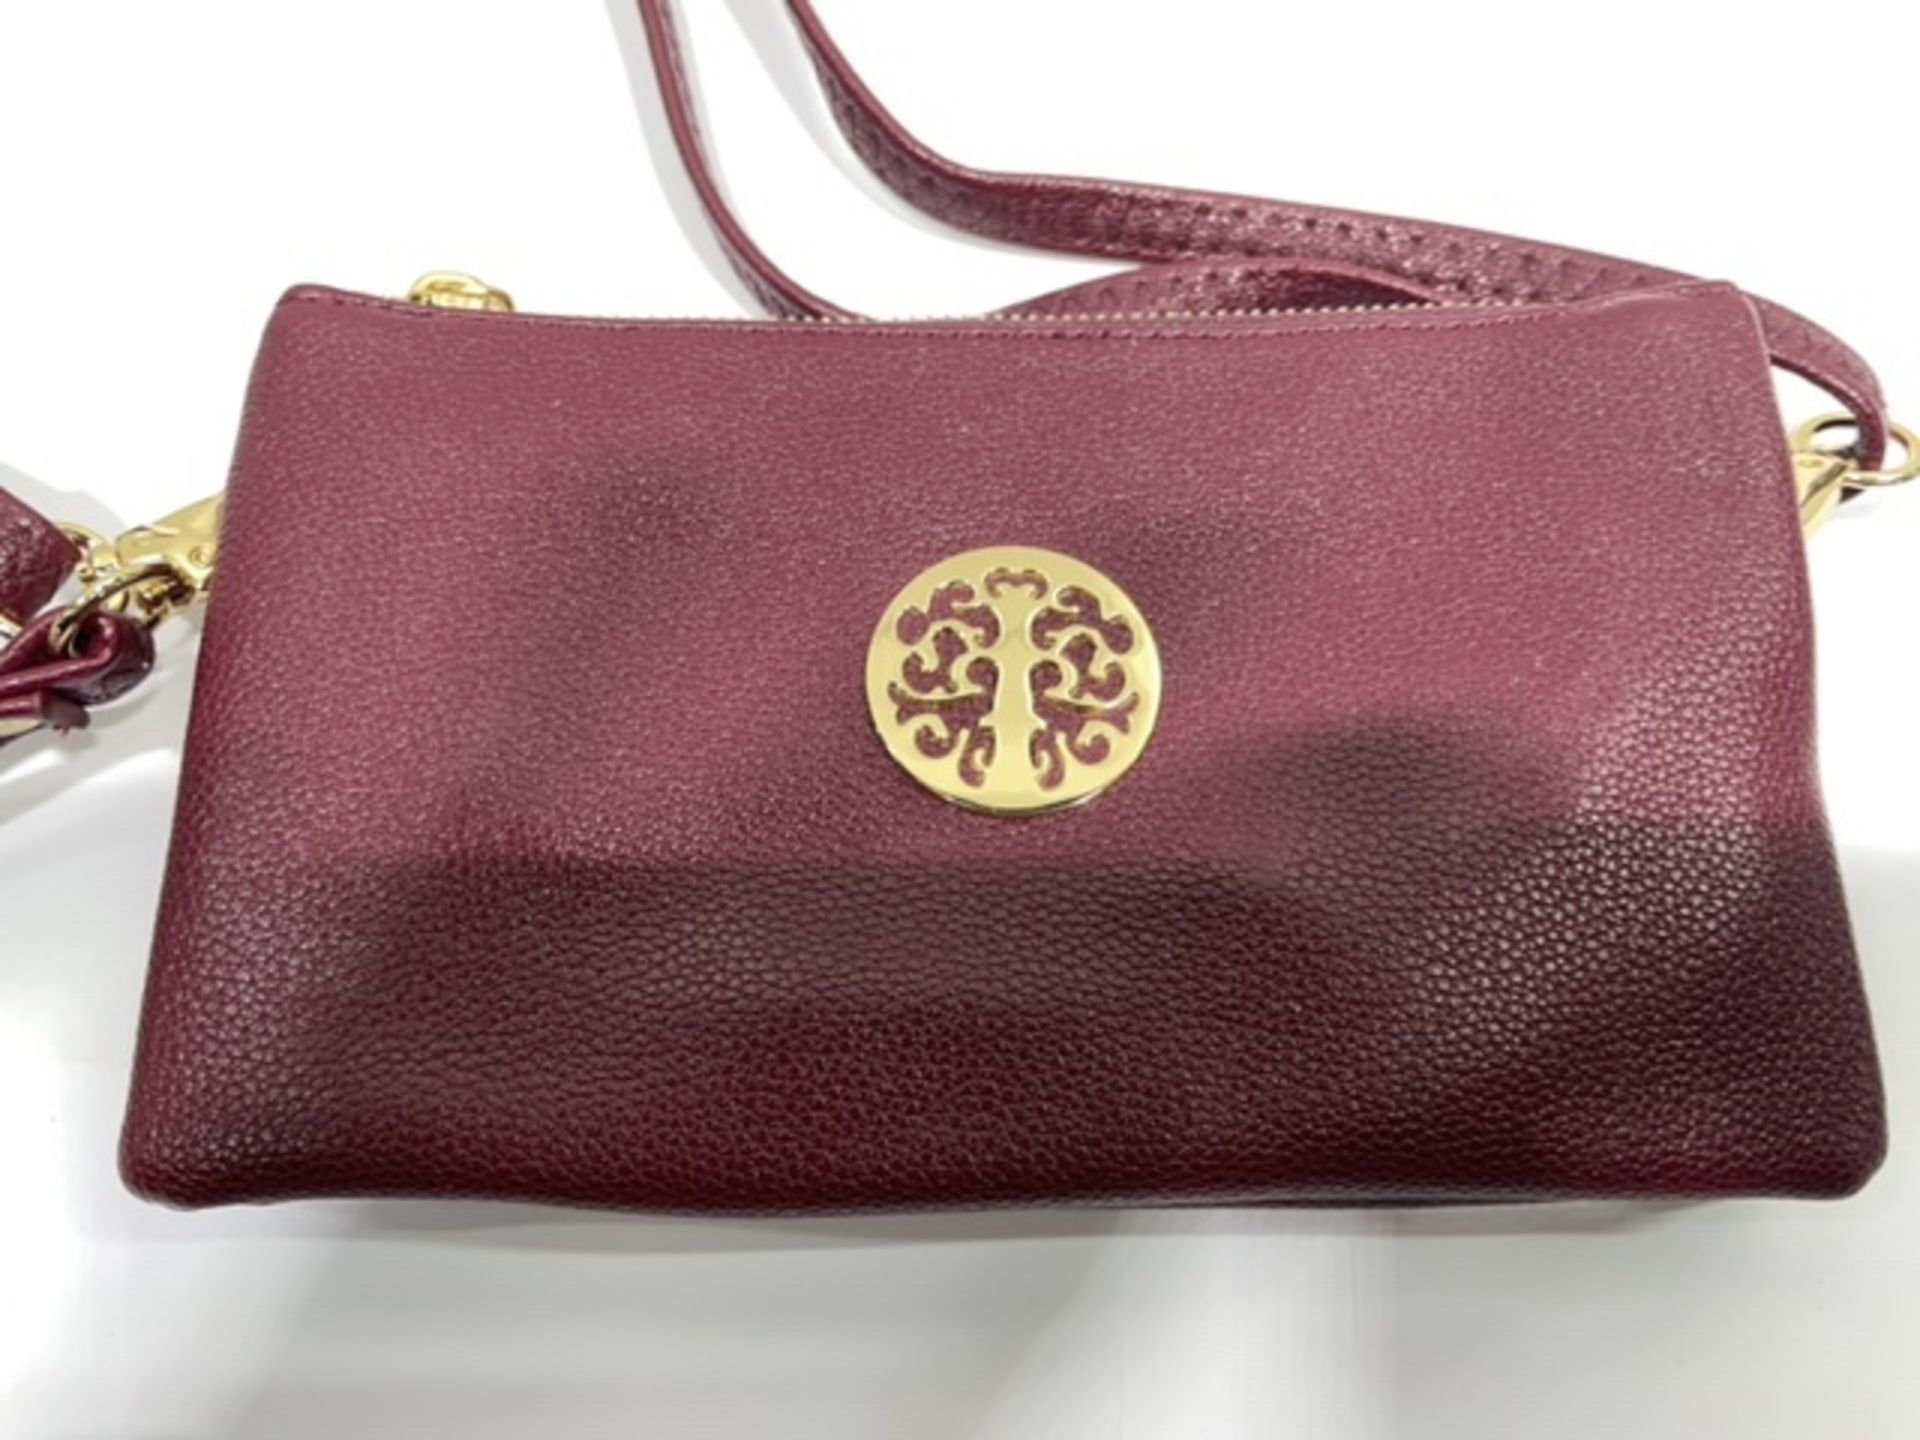 29 x Wine Coloured Handbags | Removable Shoulder Strap and Clutch Strap - Image 3 of 3